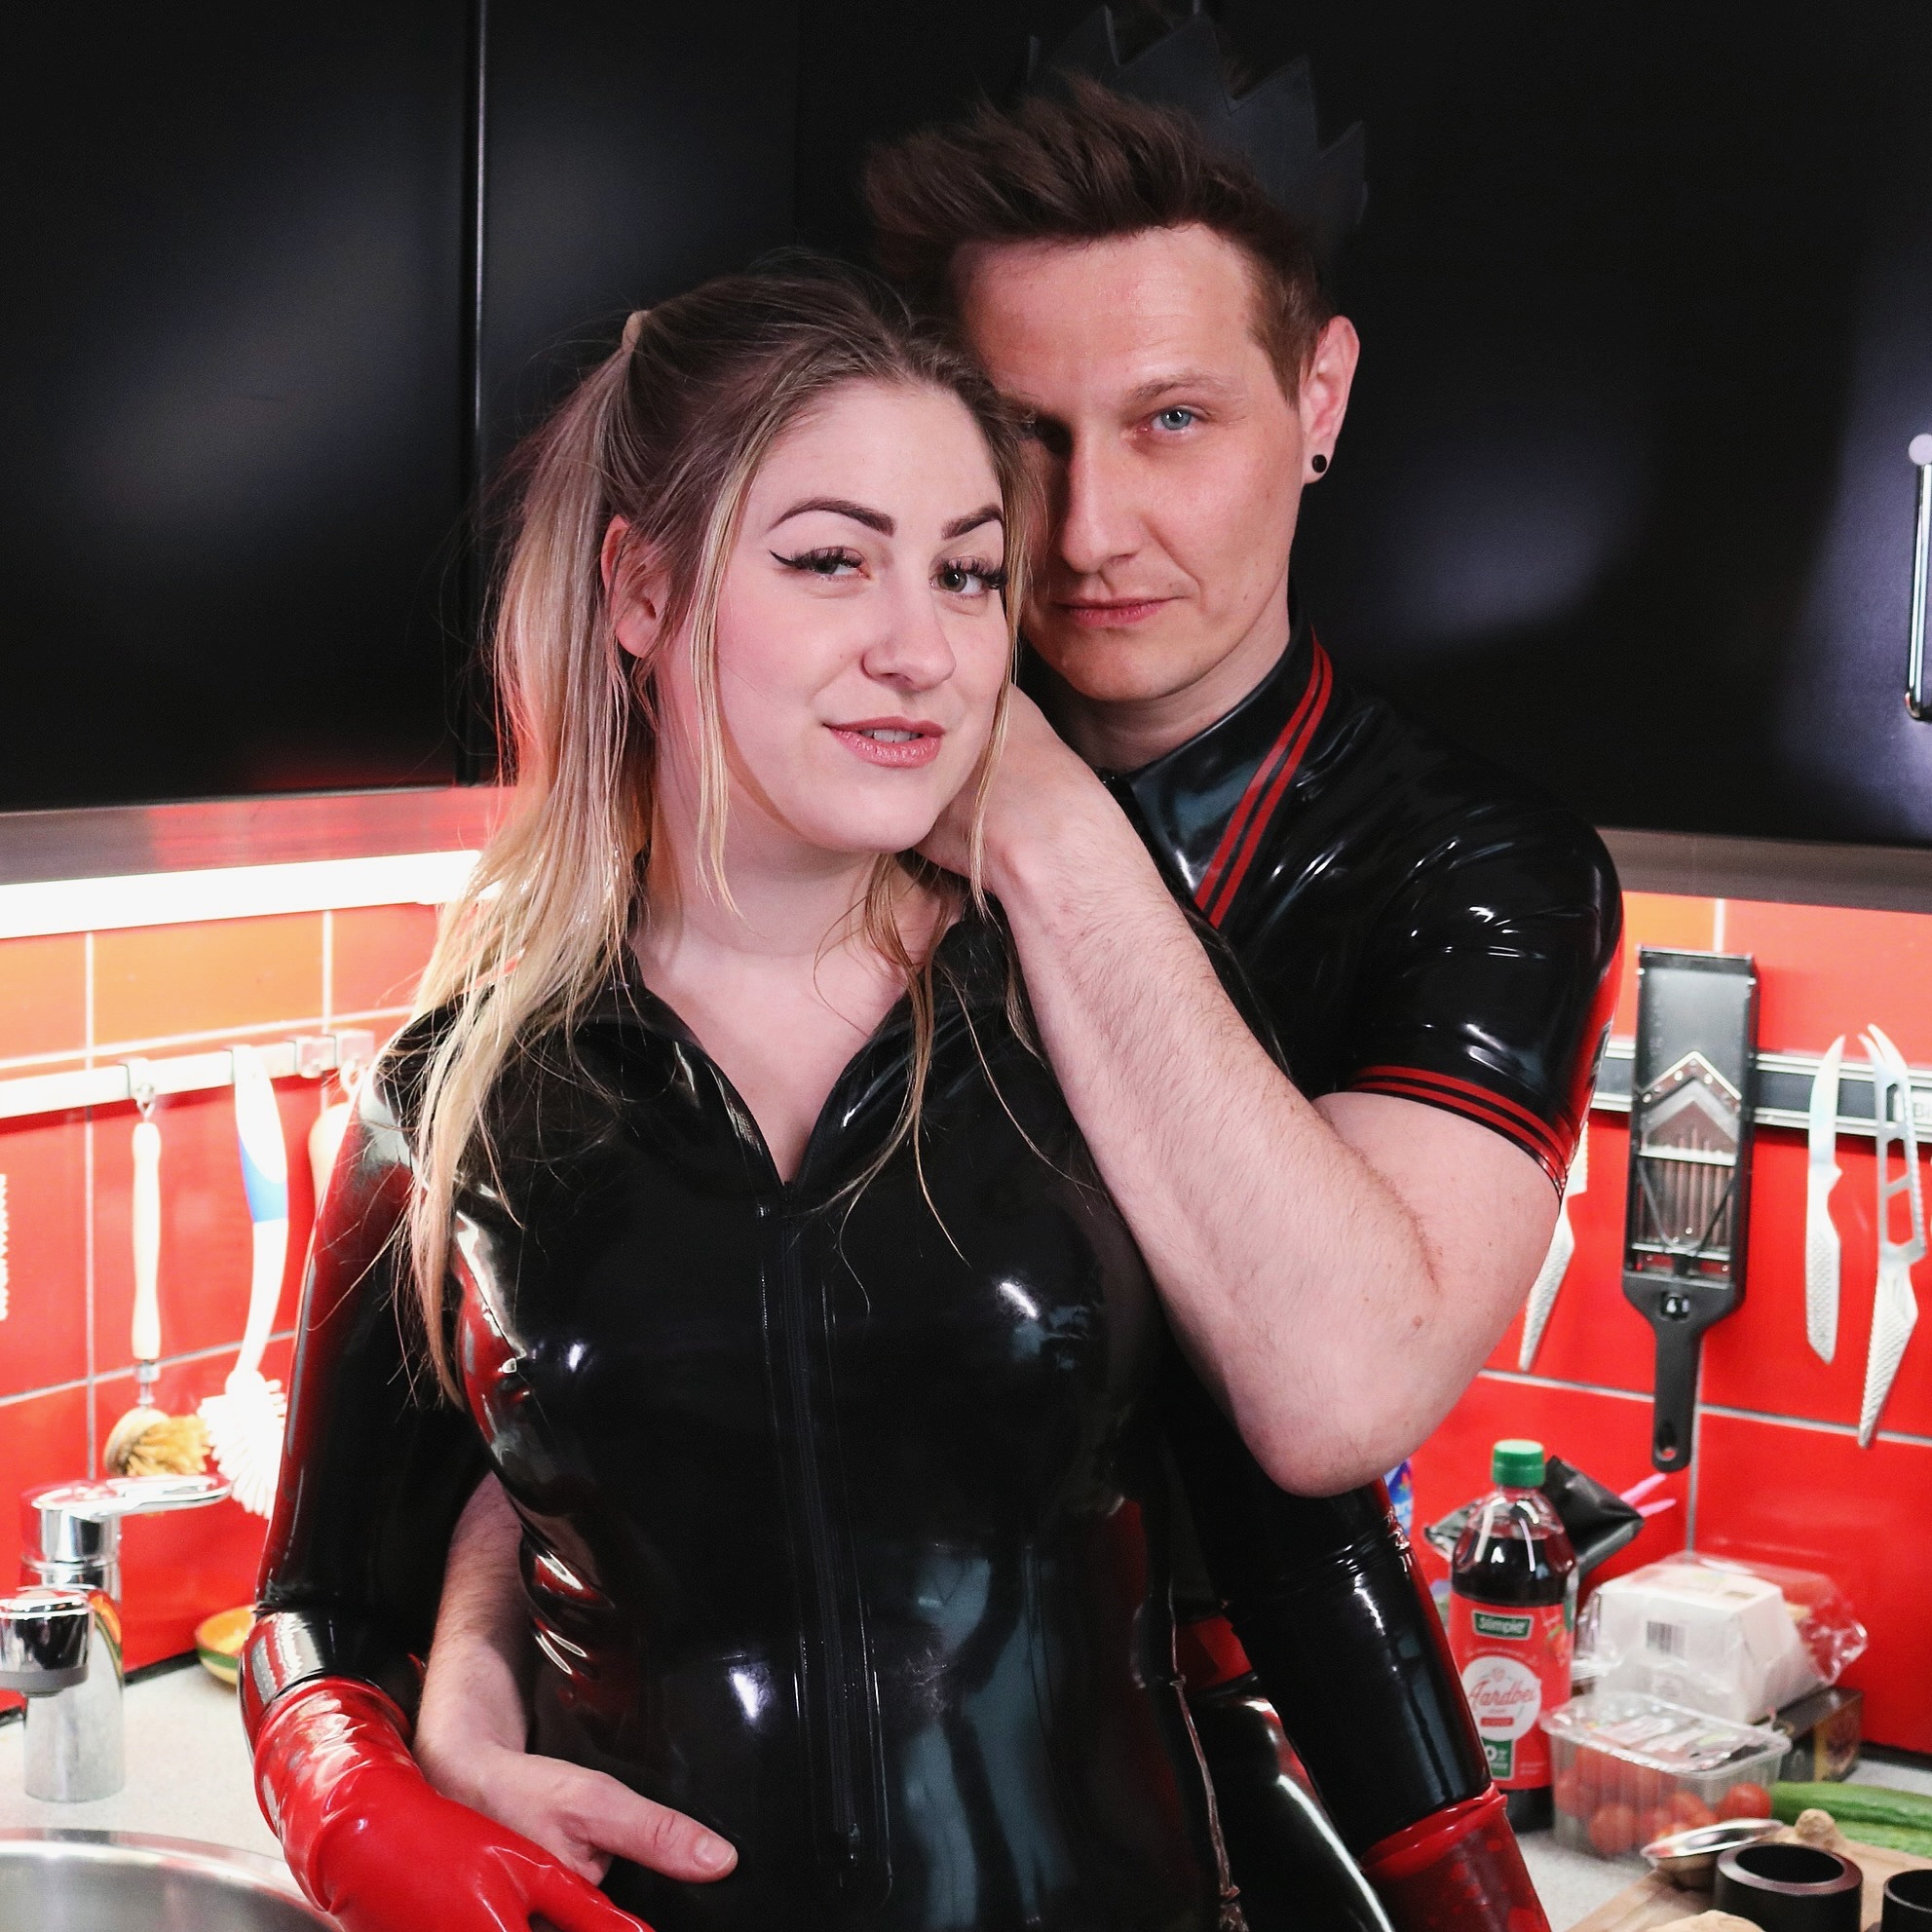 What do you do in the Kitchen? @mrjay.be and I take Pictures in Latex there 🔪 Listen to Our Episode on @sinquest.nl Podcast (Dutch) here 👉🏼 https://open.spotify.com/episode/5cA7wJnLjWUrhBlVmcWRjy 👈🏼 #latex #latexmodel #podcast #cutegirl #collab #shiny #f2f #f2family @f2f_com @fancentrotribe